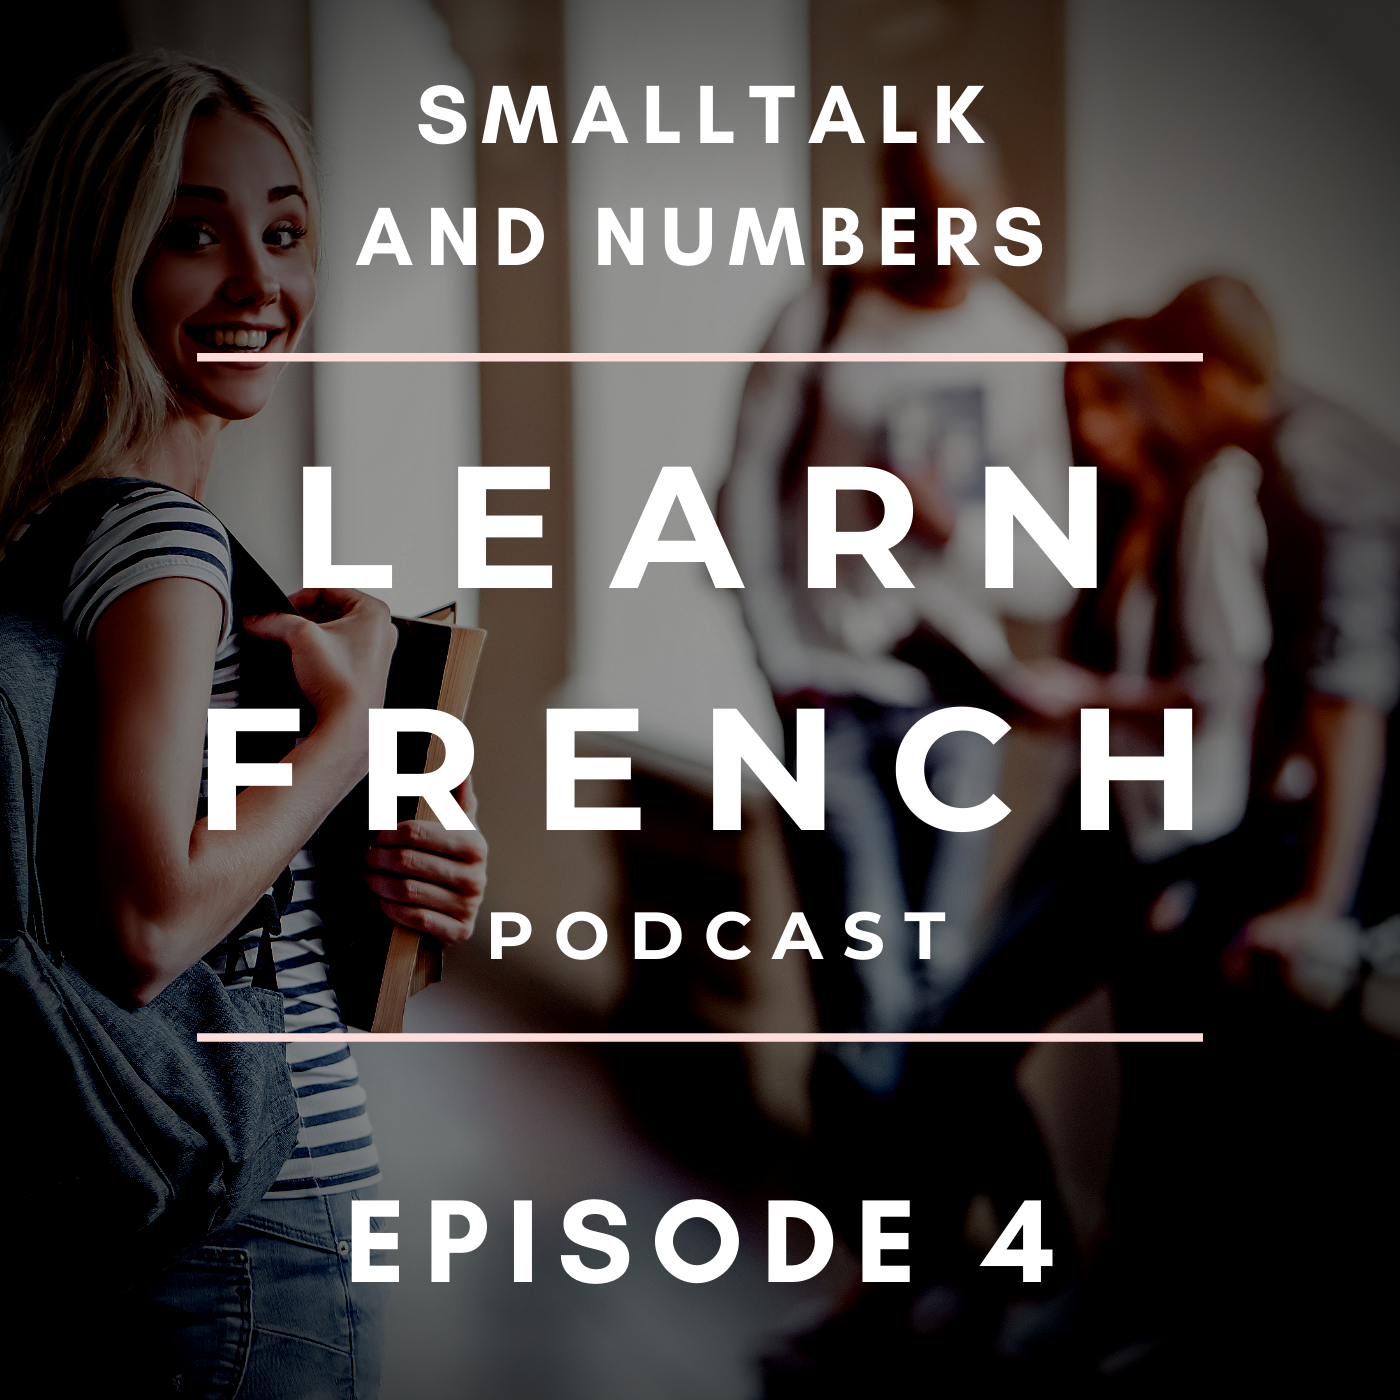 Learn French Podcast: Smalltalk and Numbers (Episode 4)